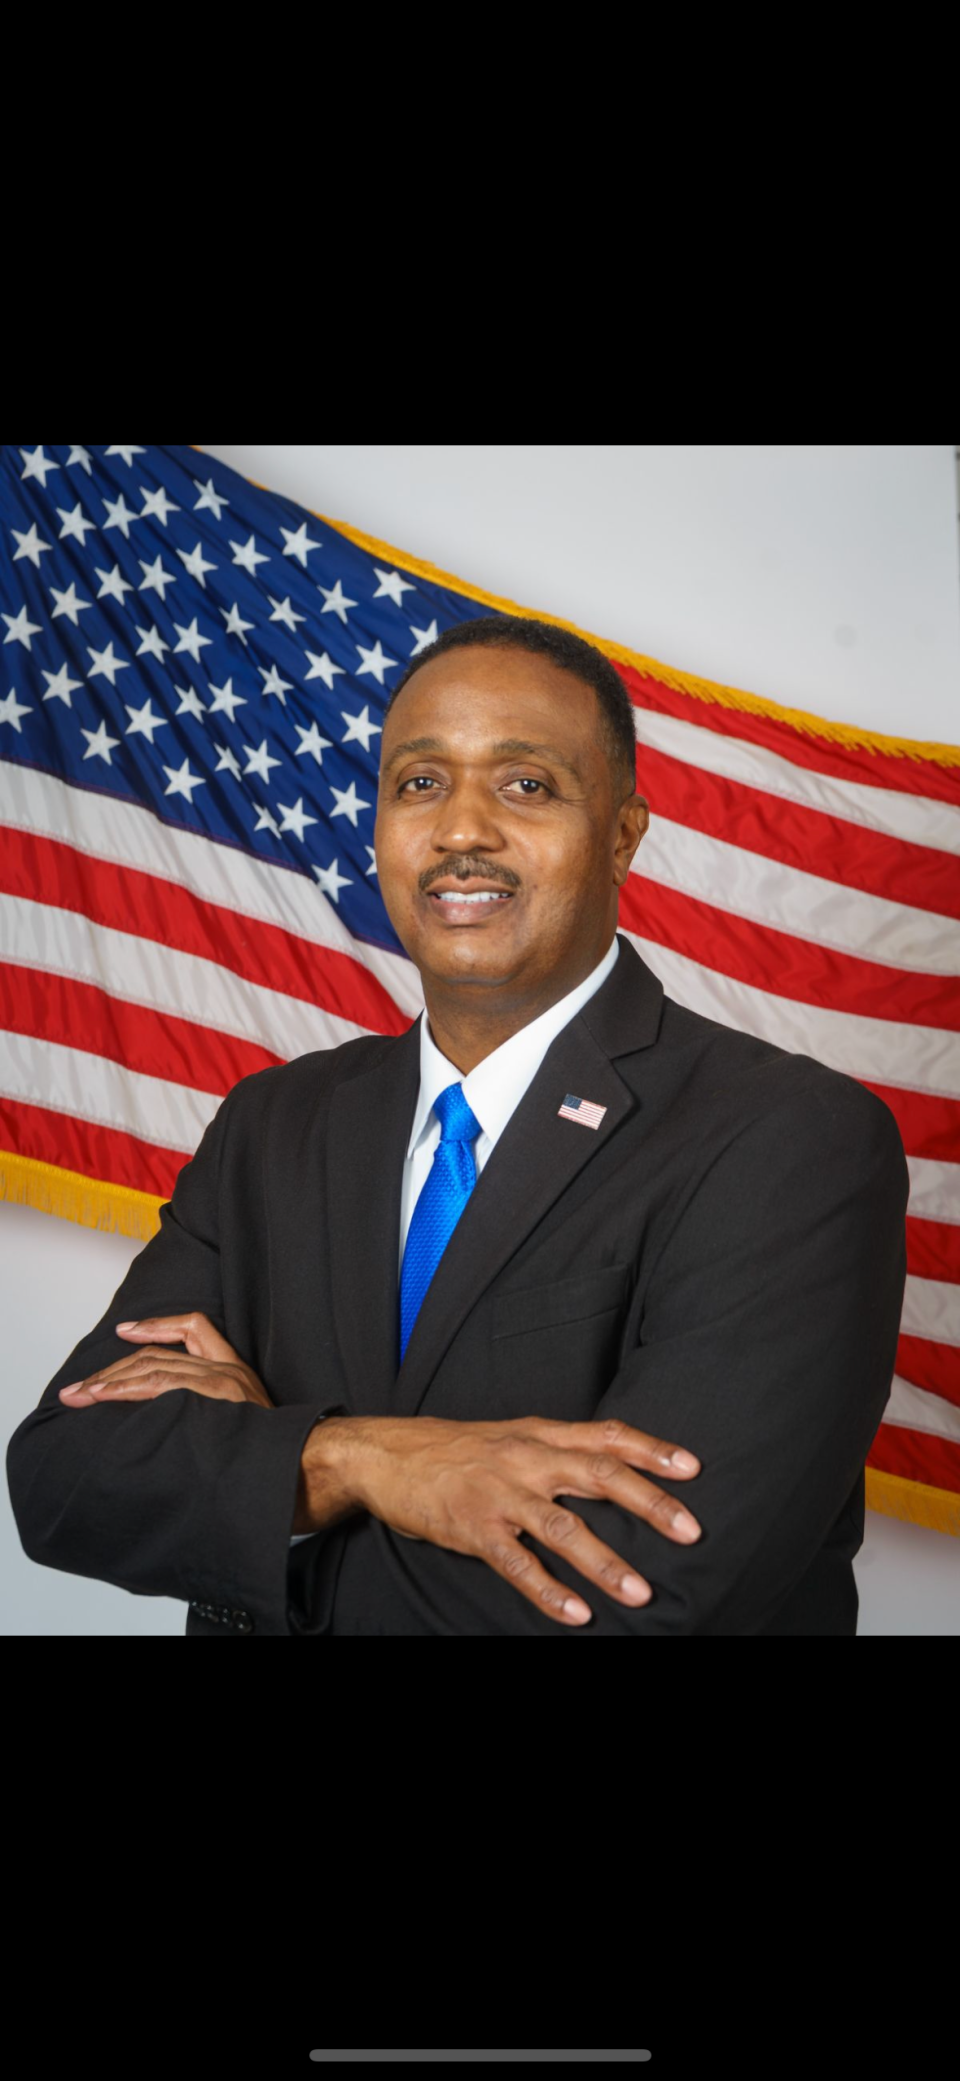 Richard Coleman, a former chief of multiple police departments in Georgia, has announced a run for sheriff of Chatham County.